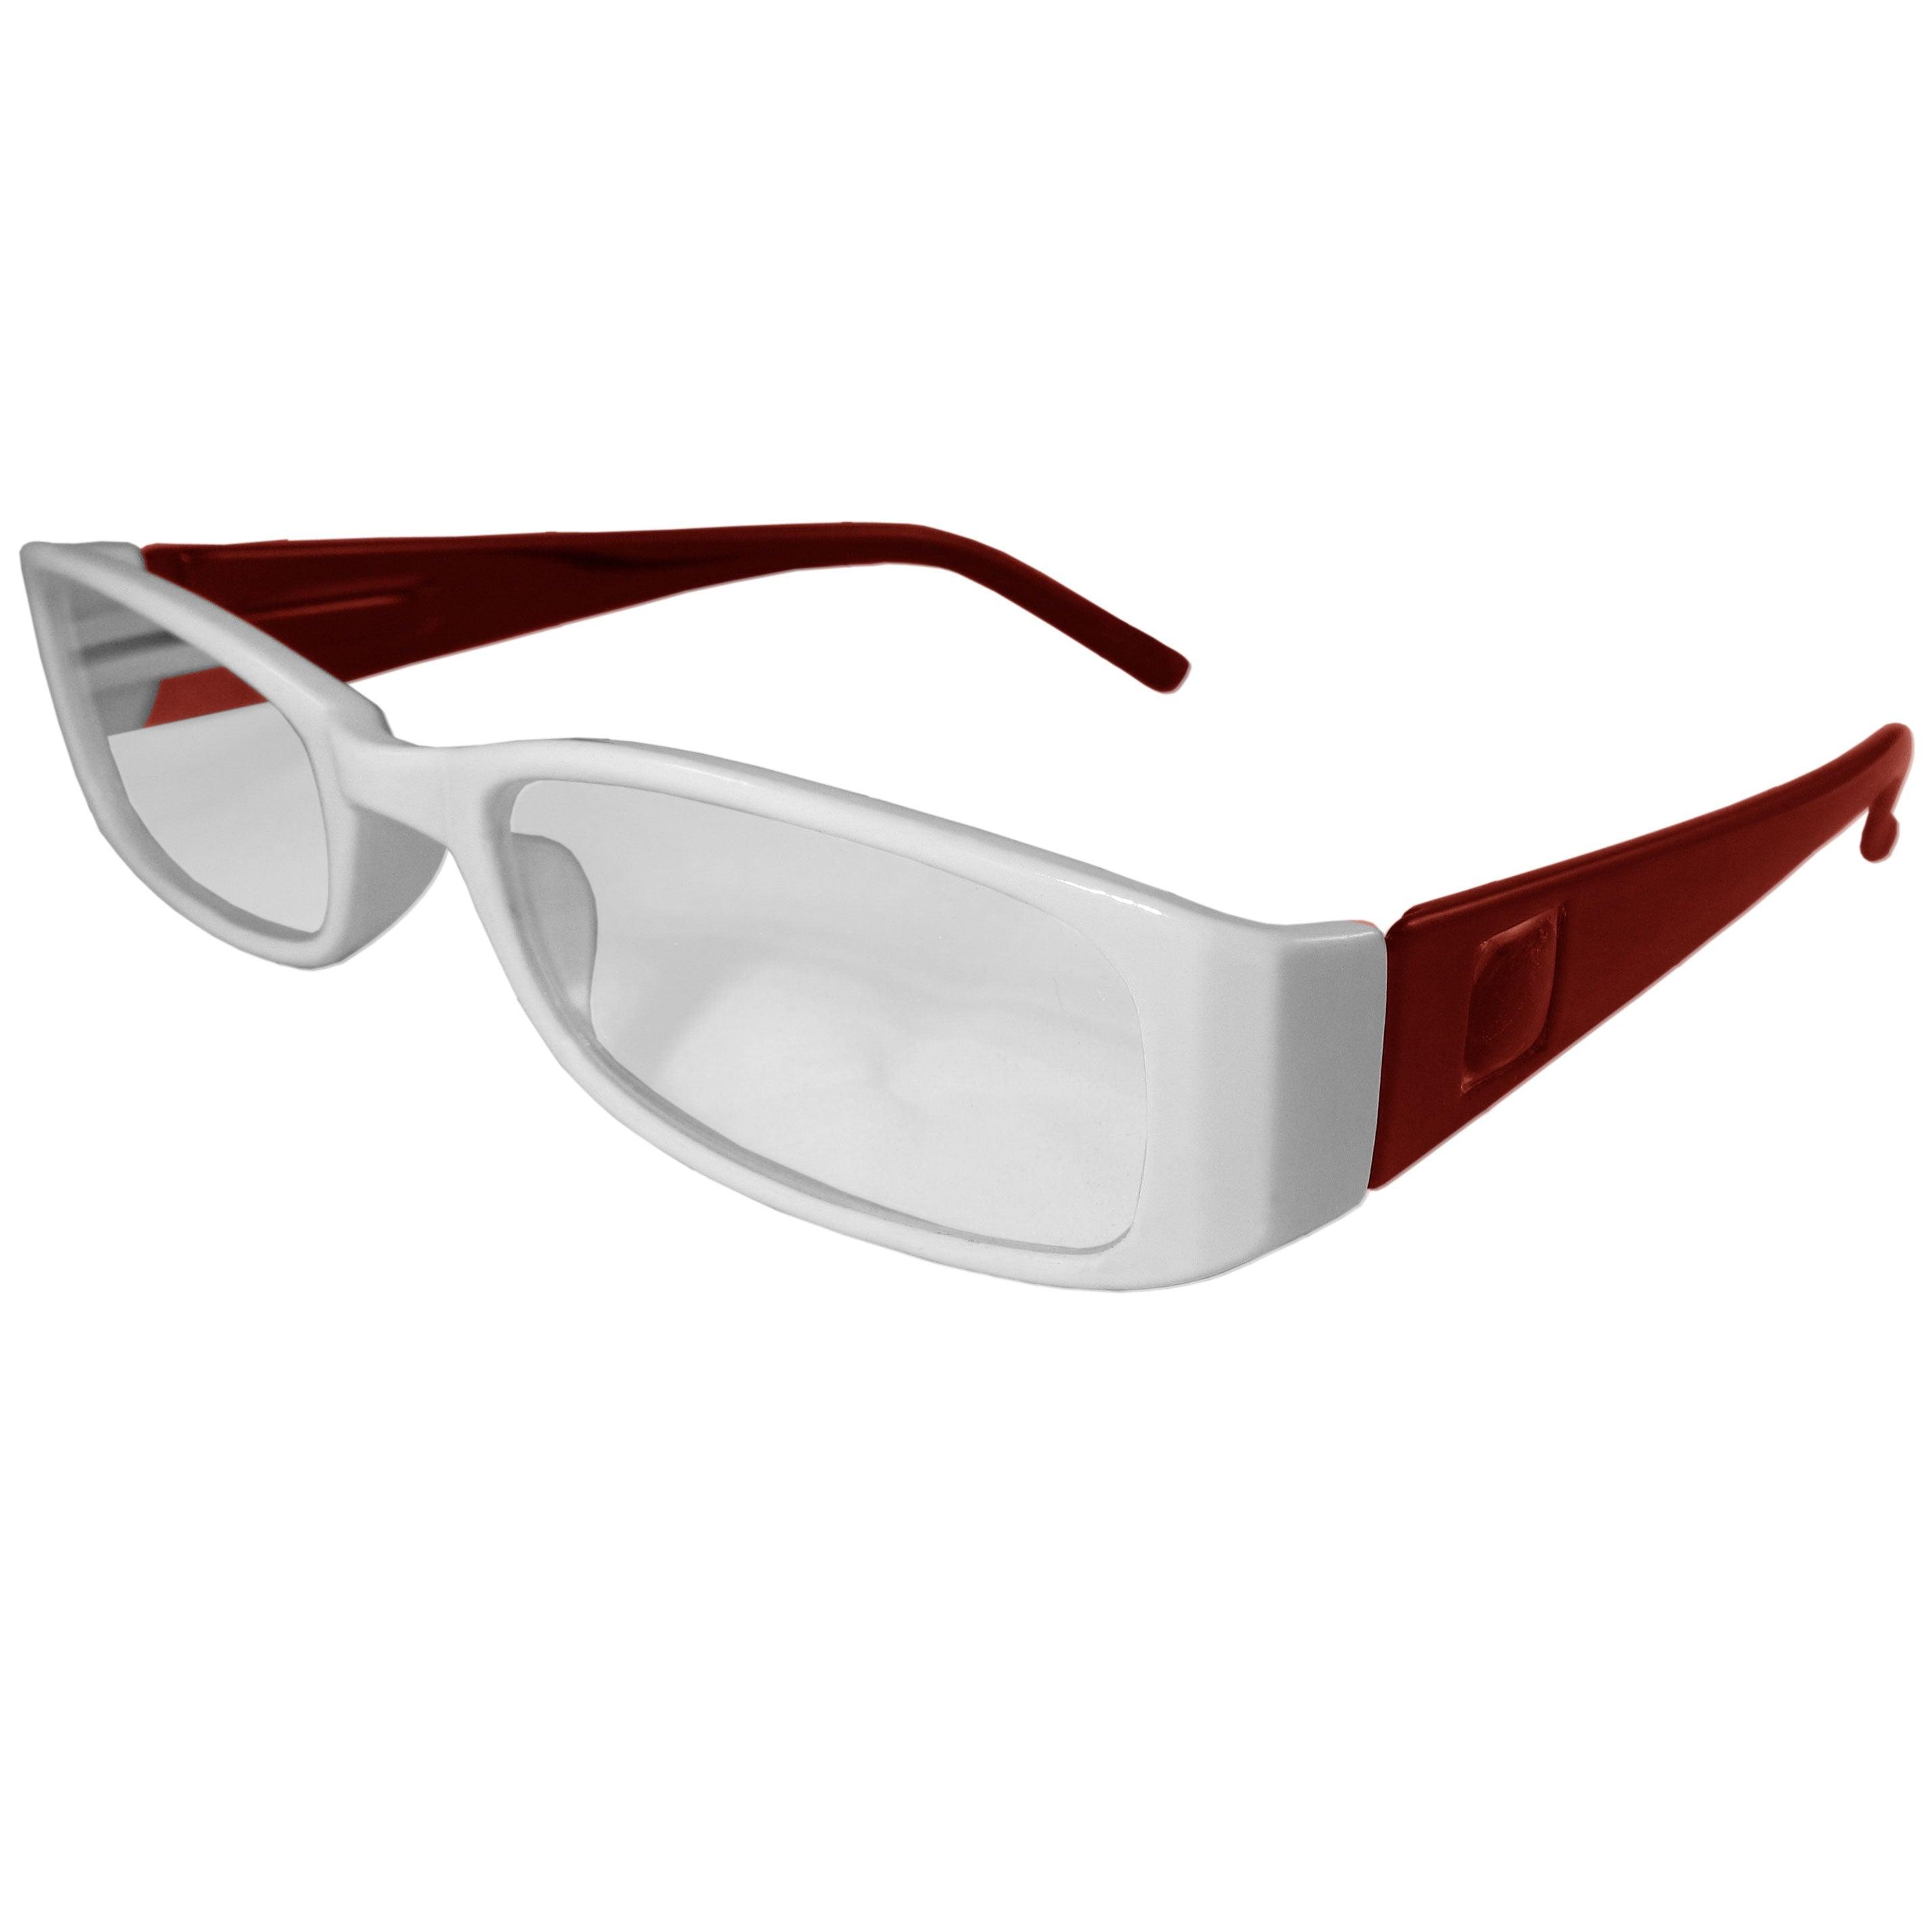 White and Red Reading Glasses Power +1.75, 3 pack - Flyclothing LLC